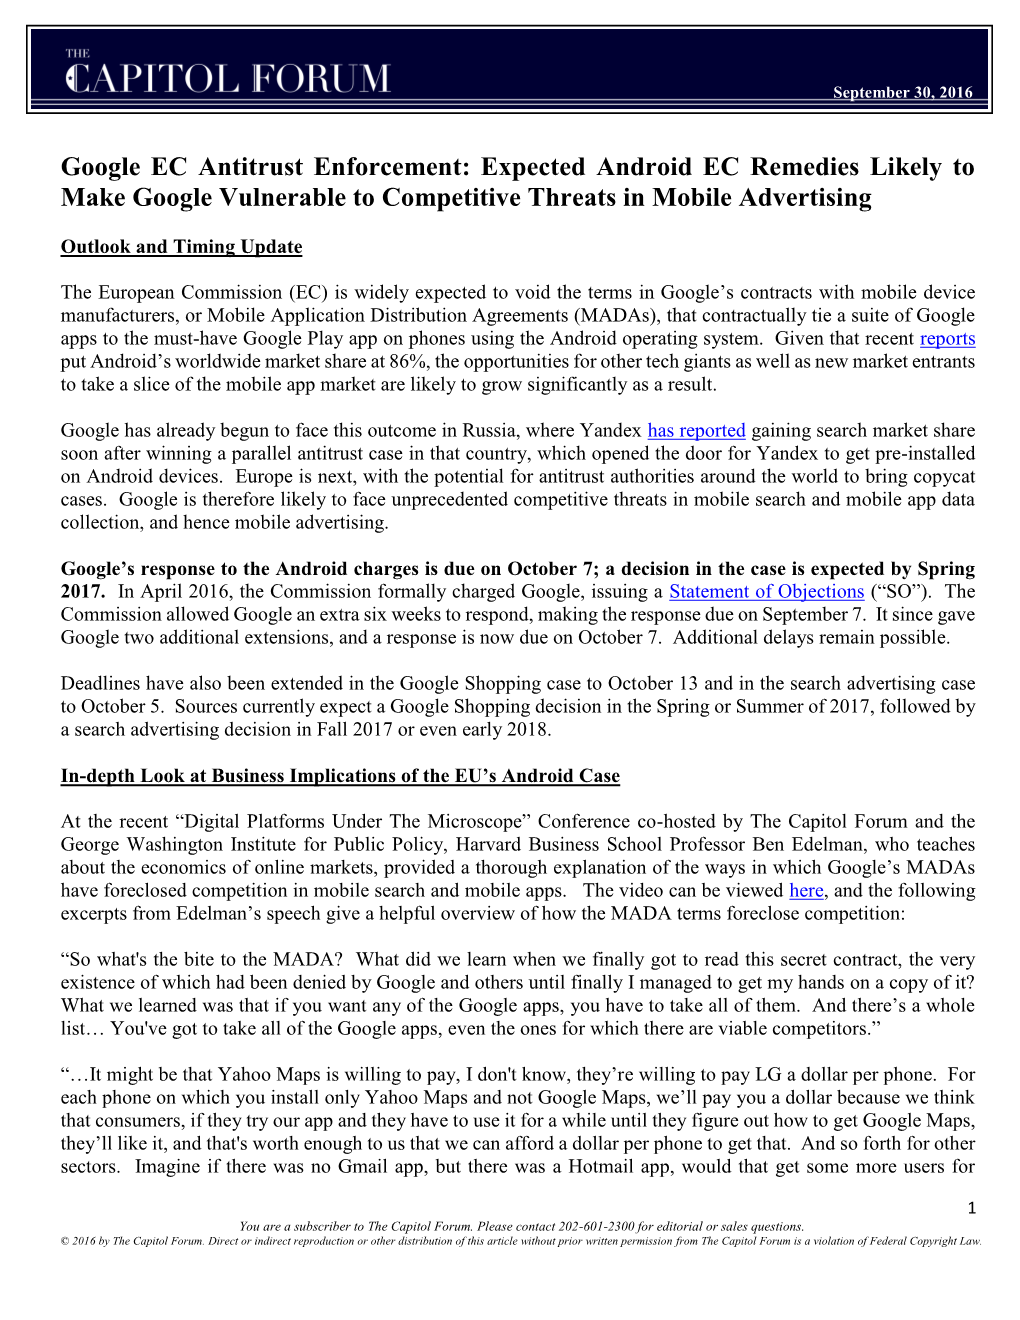 Google EC Antitrust Enforcement: Expected Android EC Remedies Likely to Make Google Vulnerable to Competitive Threats in Mobile Advertising